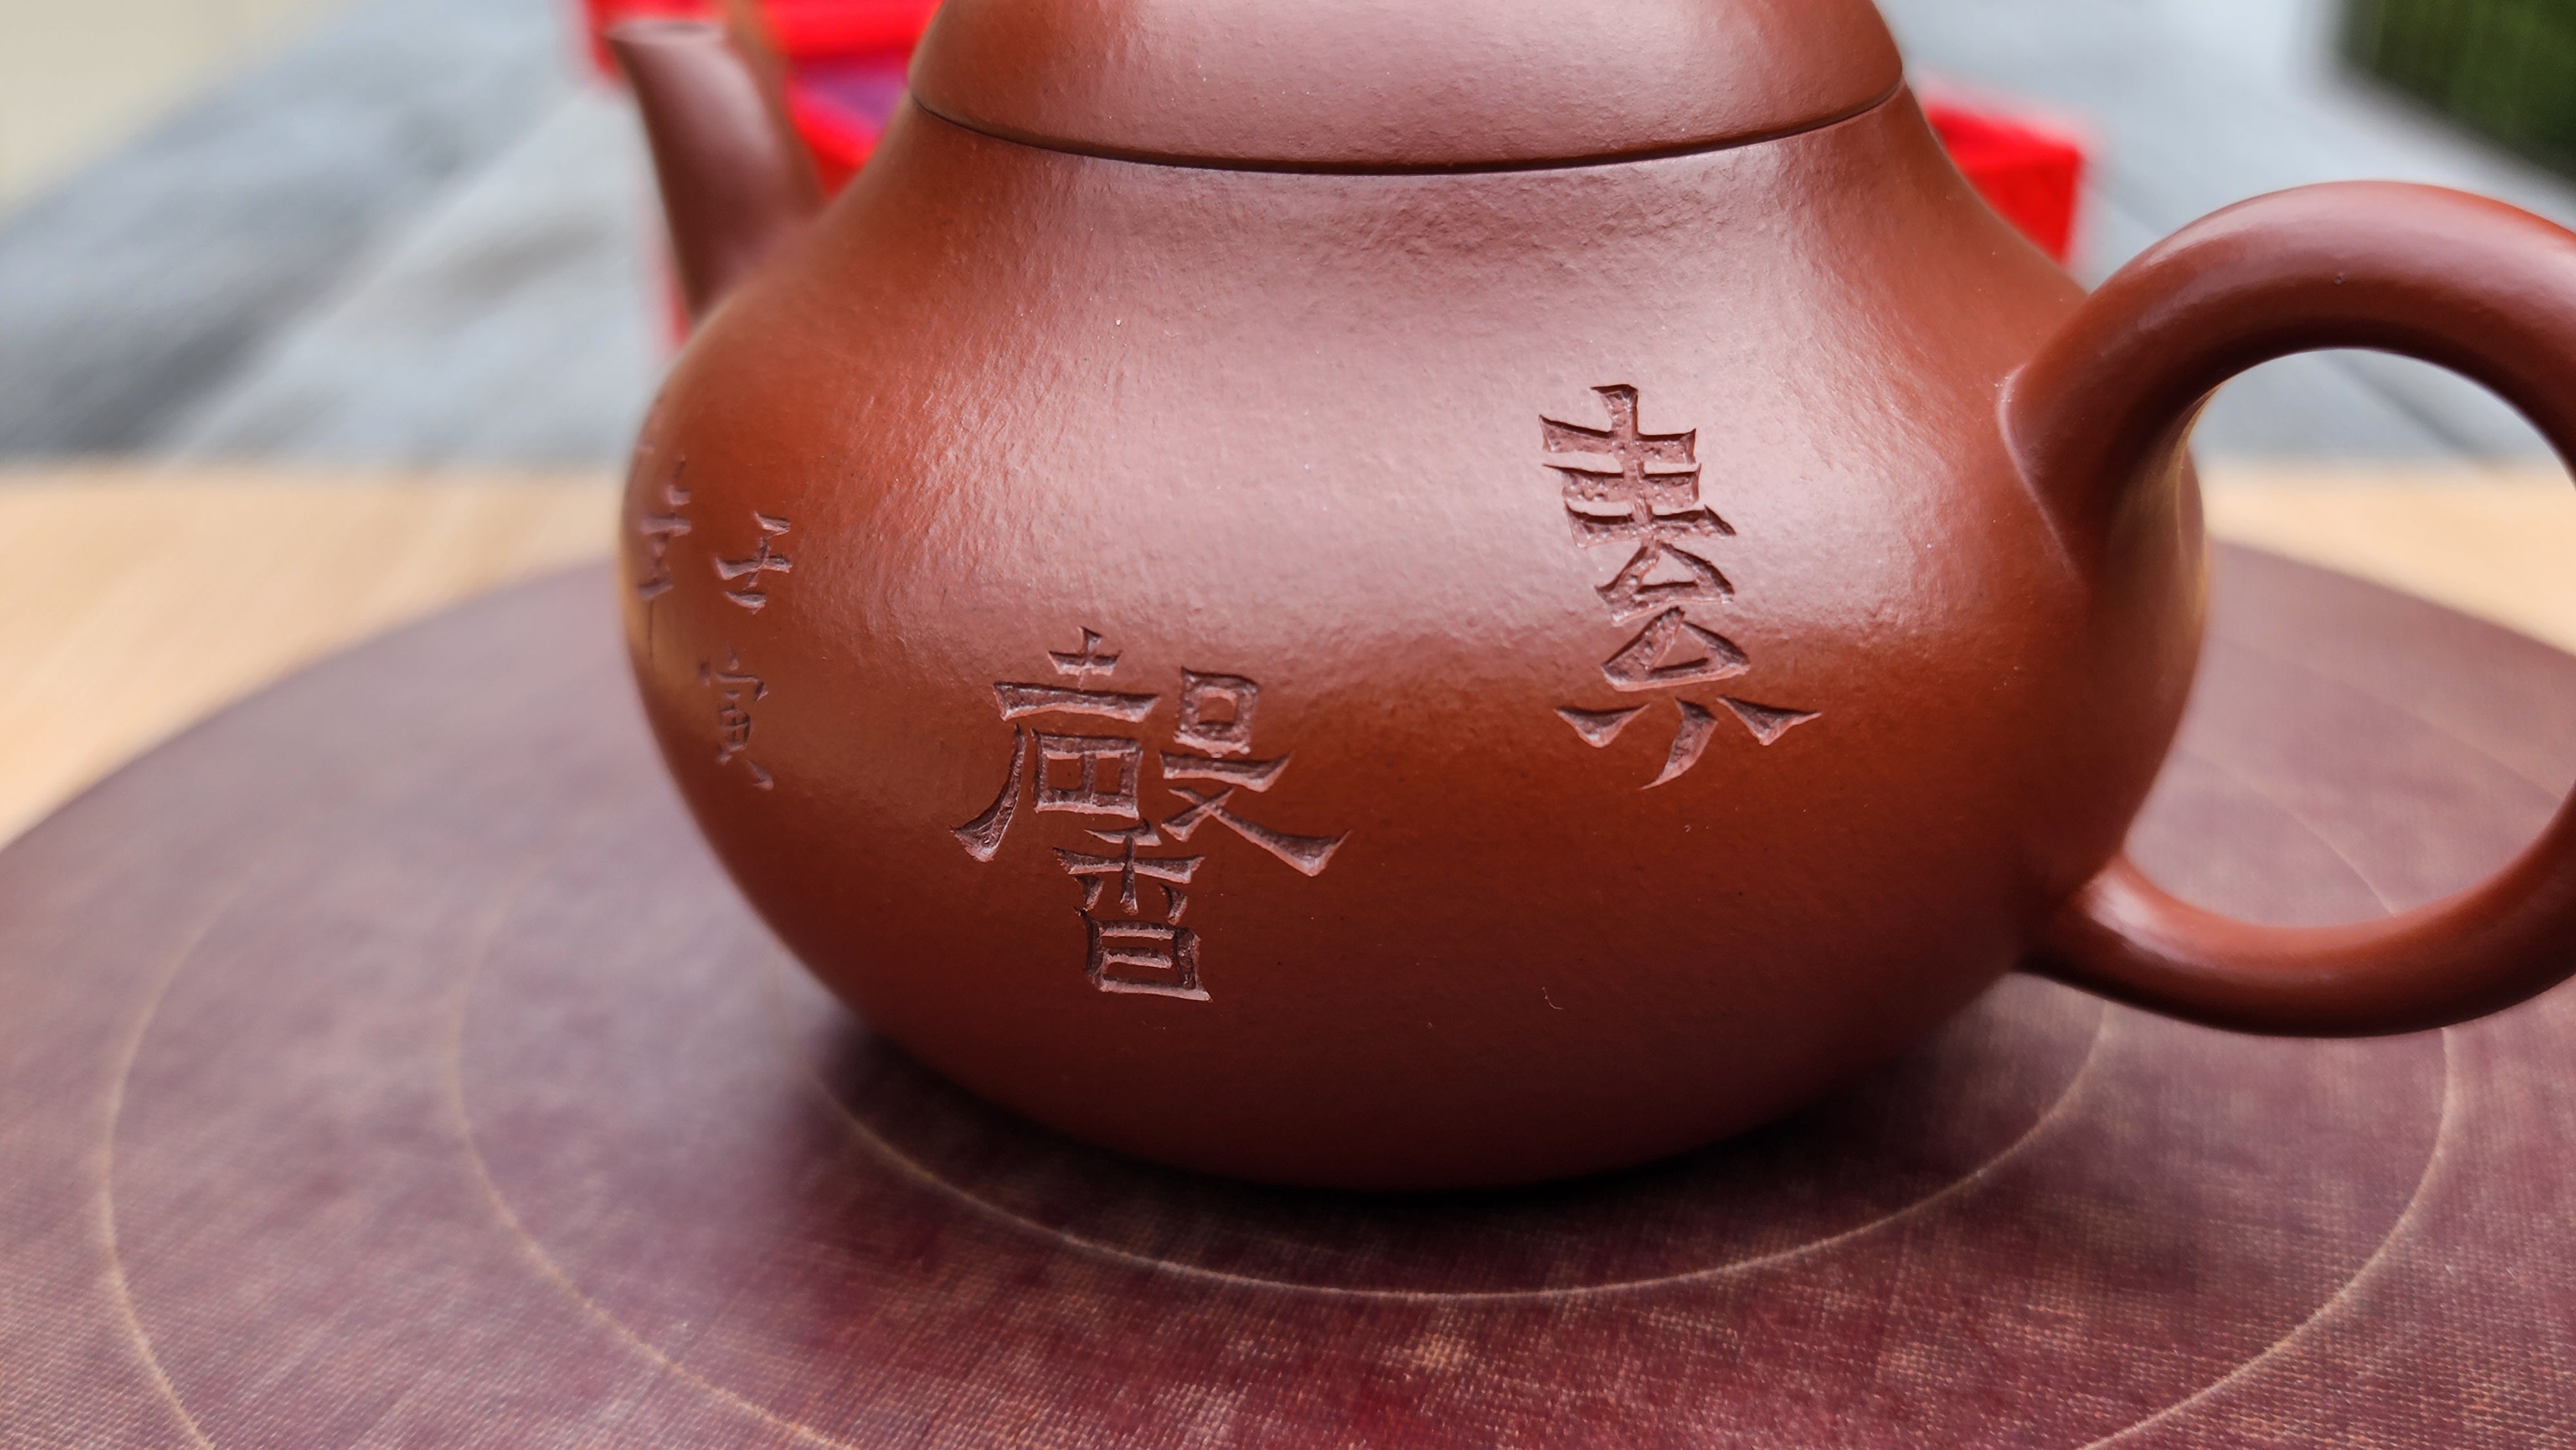 Li Xing 梨形, XiaoMeiYao ZhuNi 小煤窑朱泥, by our collaborative Craftsman Zhao Xiao Wei 赵小卫。Bamboo engraving and Calligraphy inscription by L4 Assoc Master Artist Xing Su 行素。136ml.